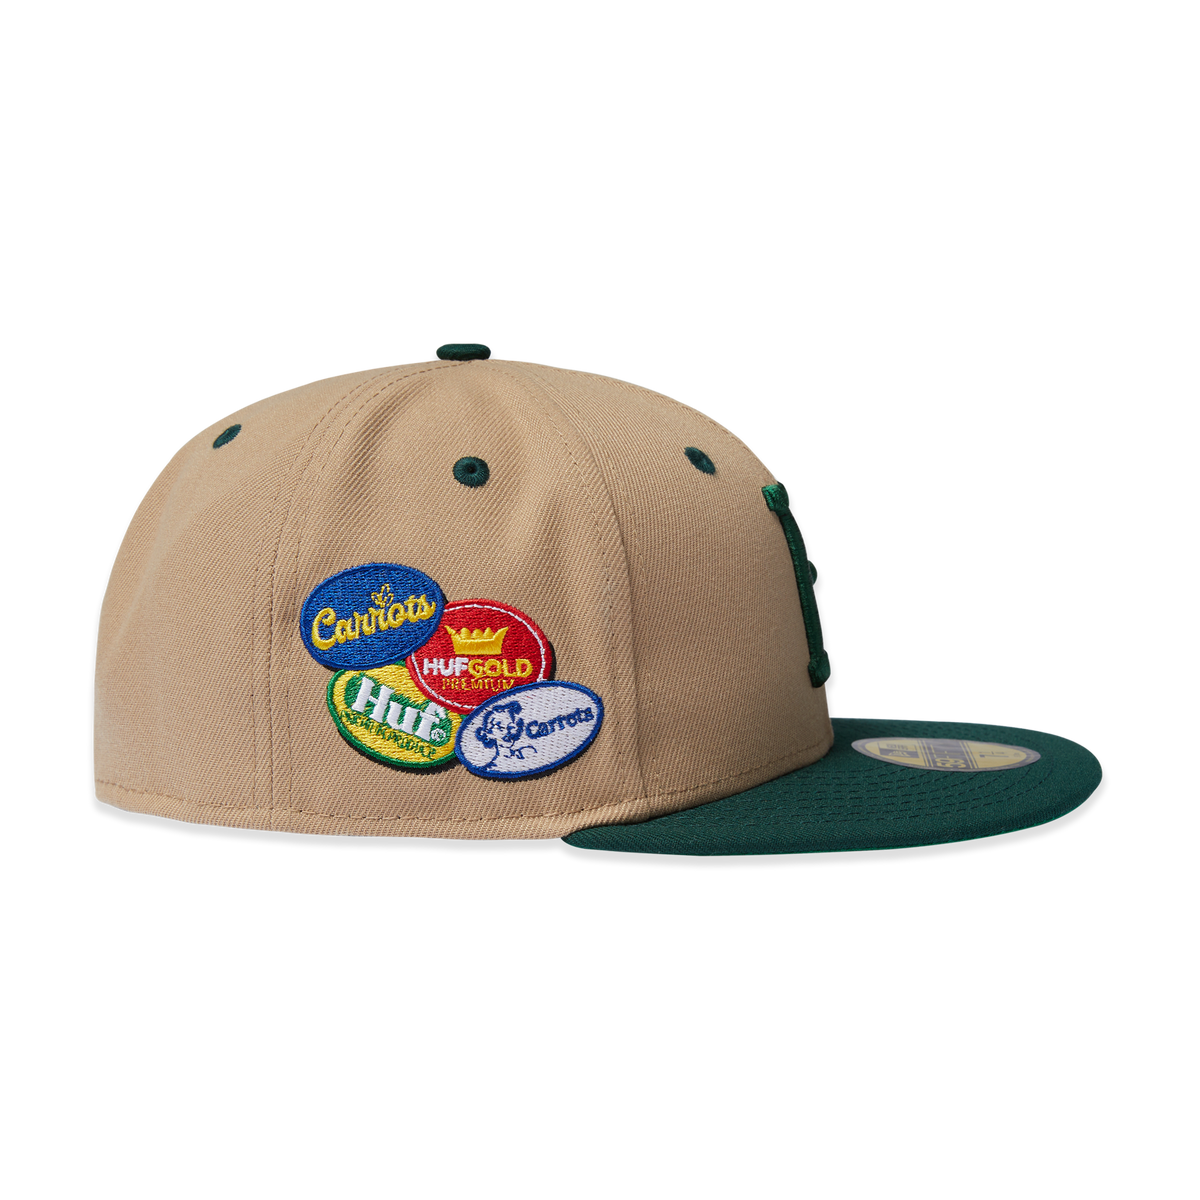 HUF x Carrots High Grade New Era Fitted Hat